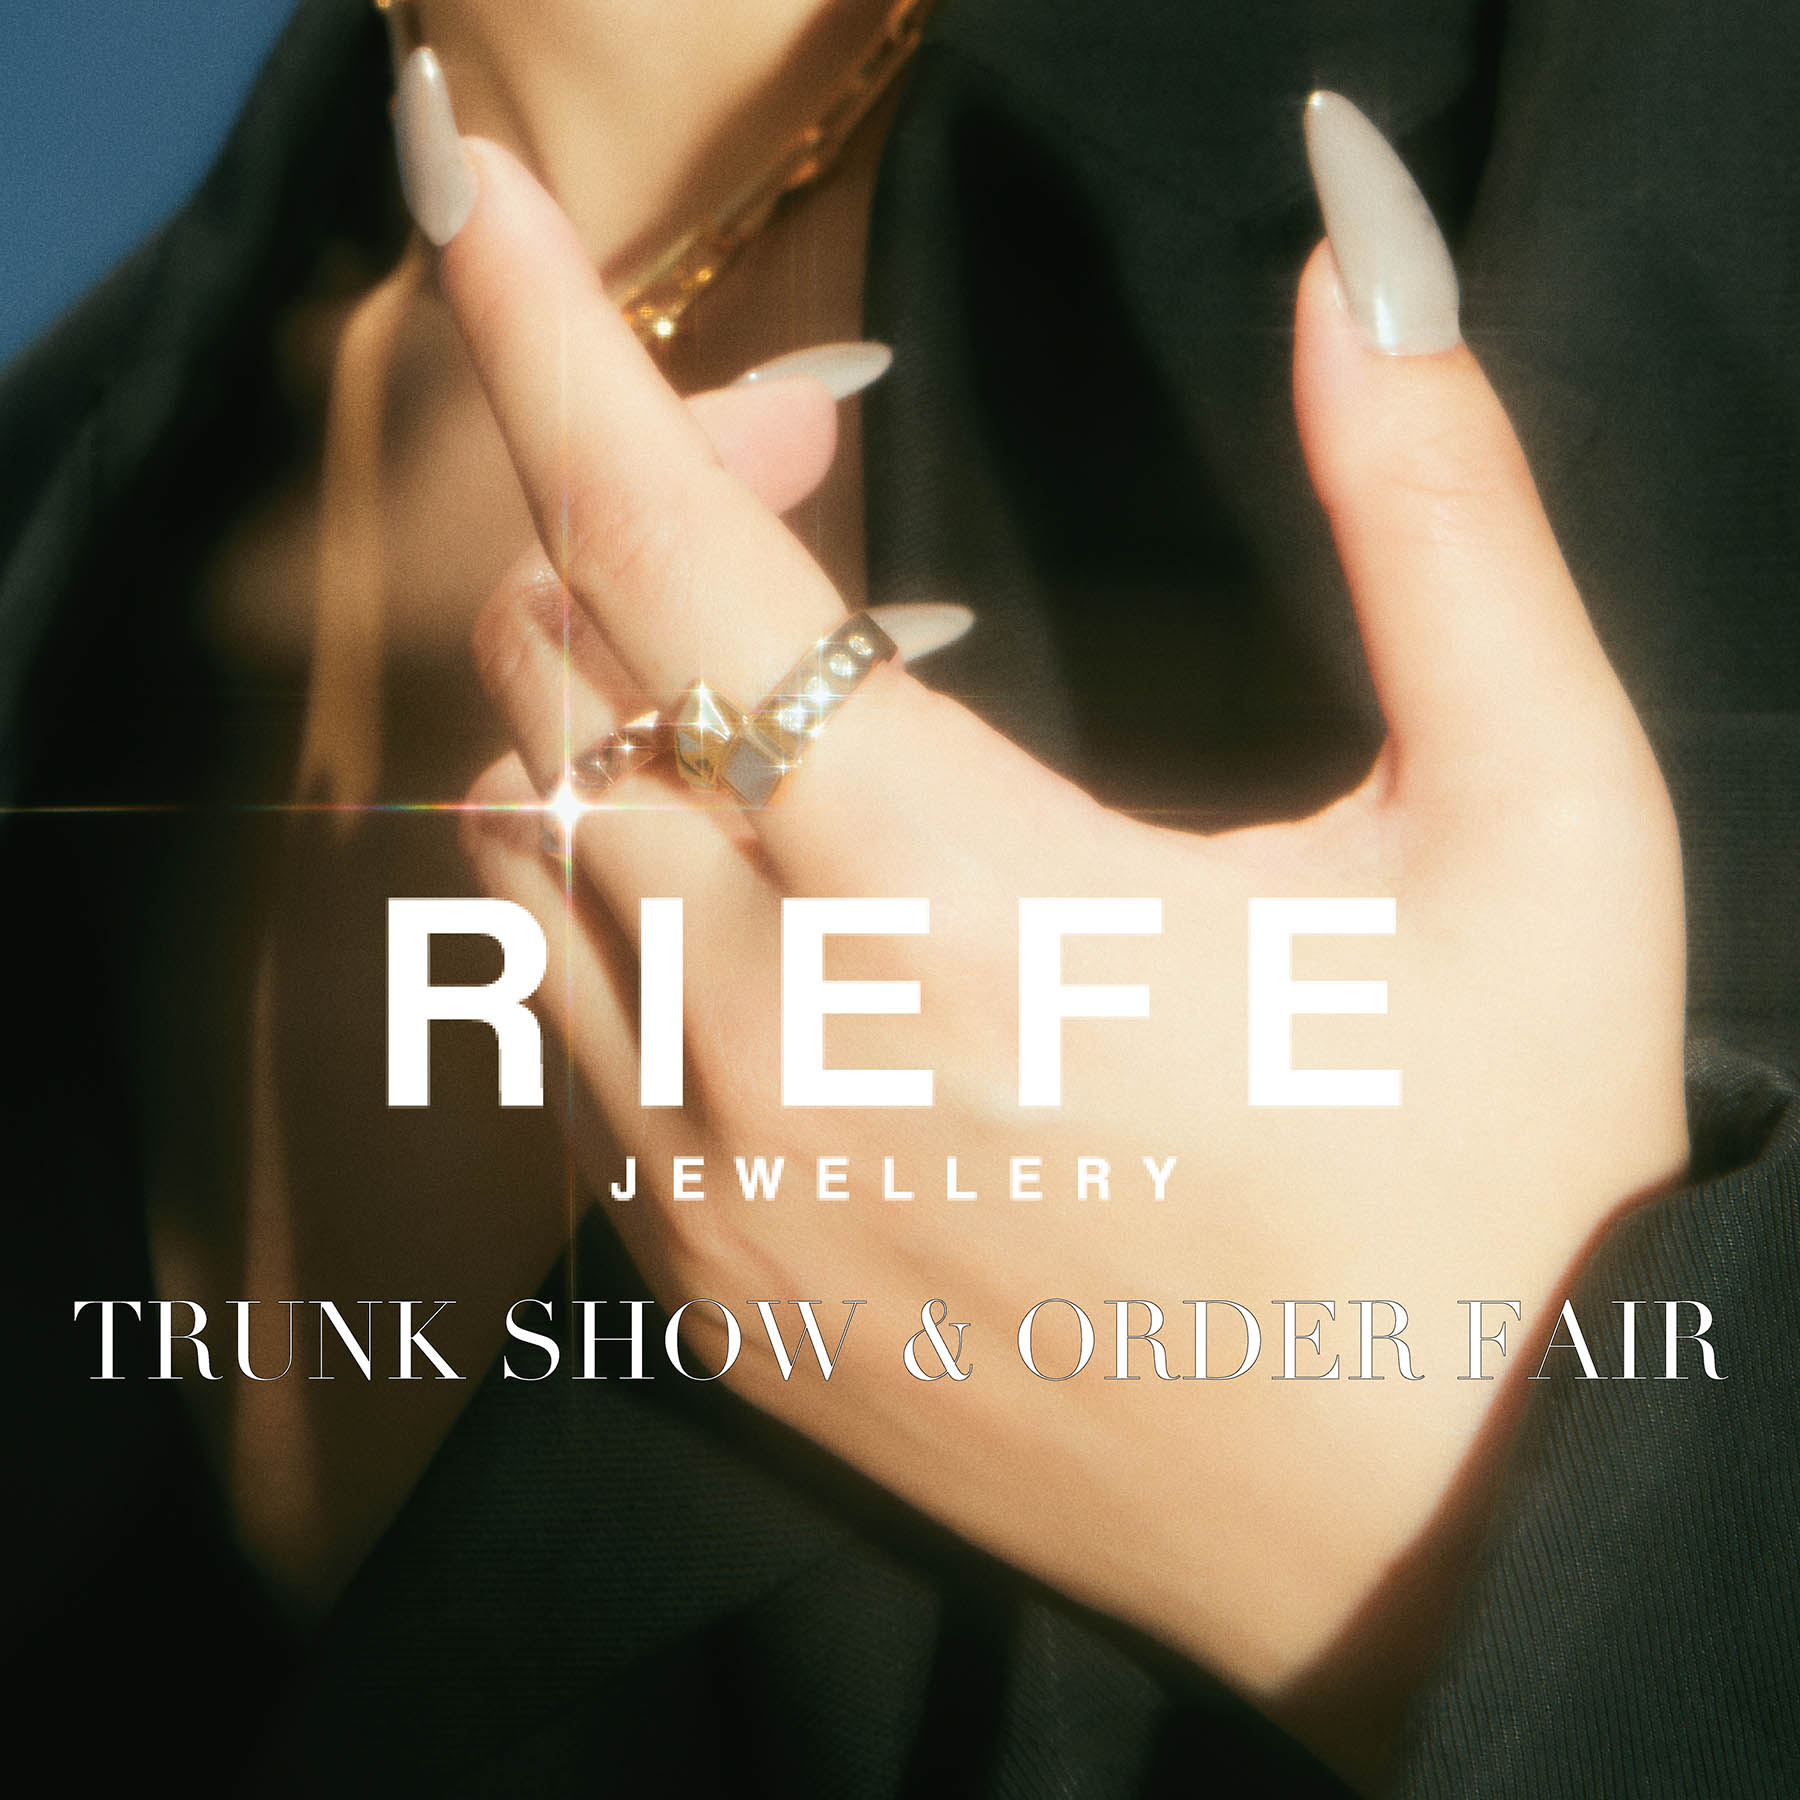 RIEFE JEWELLERY - TRUNK SHOW & ORDER FAIR -